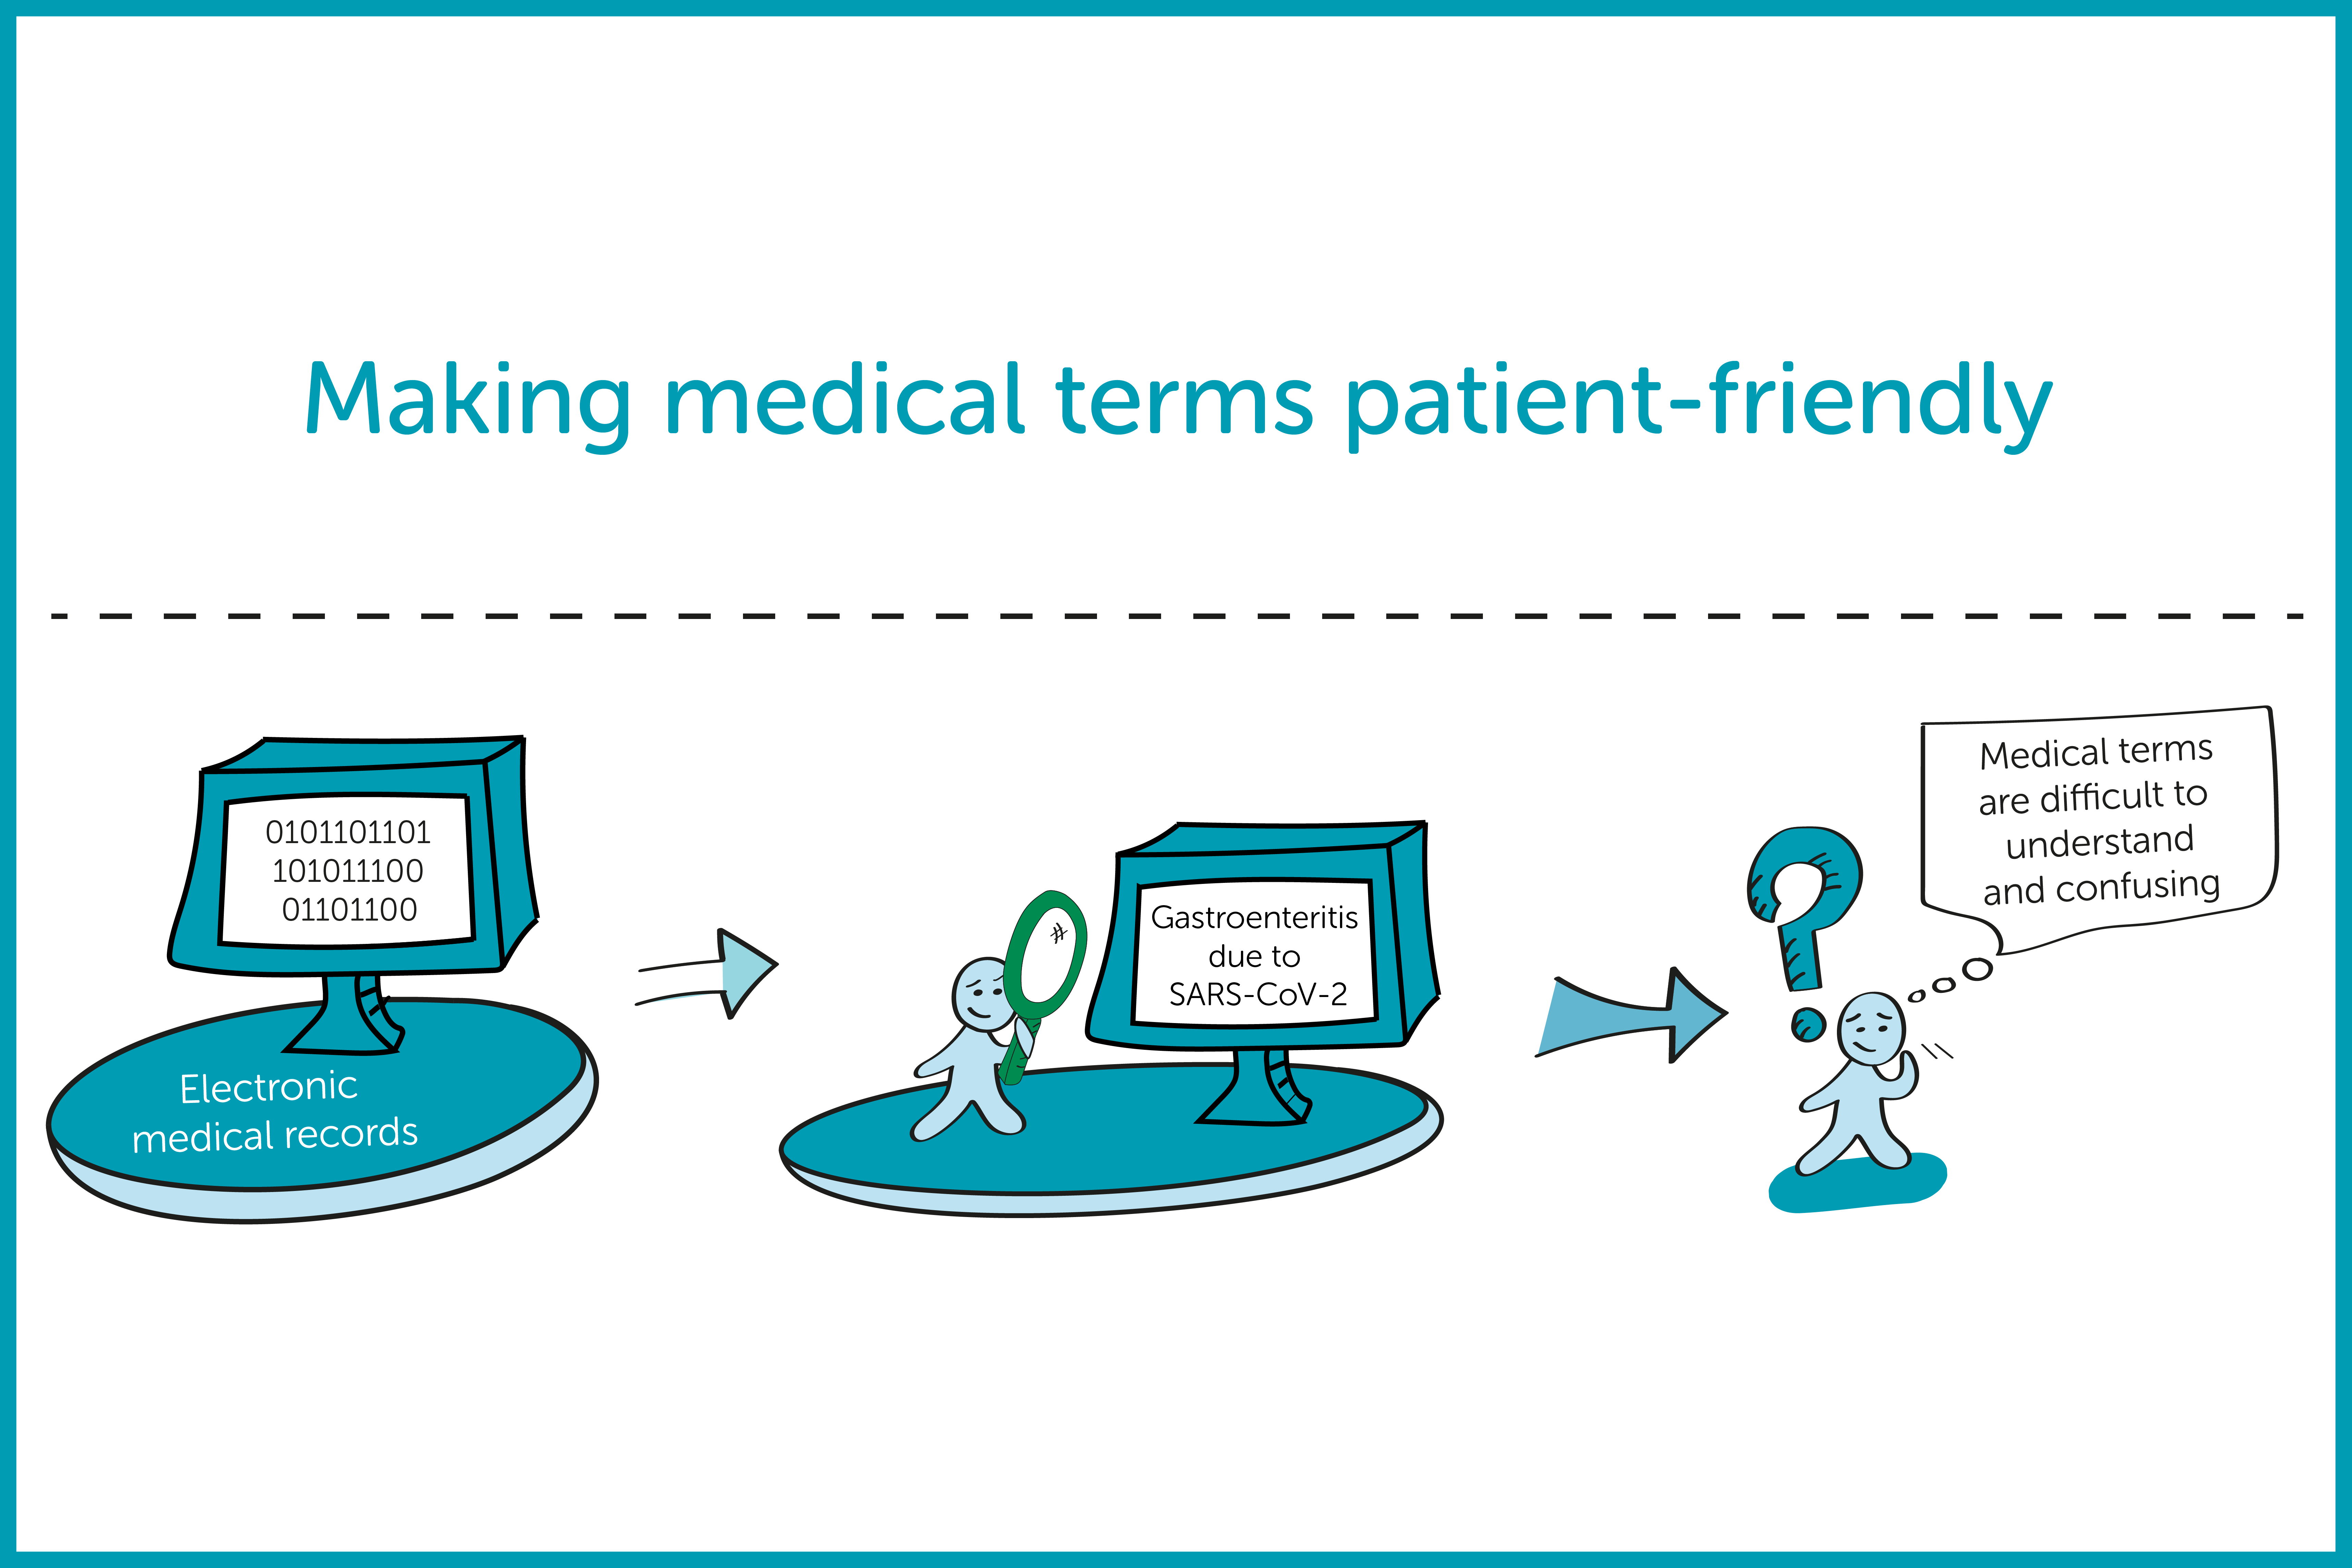 Making medical terms patient-friendly